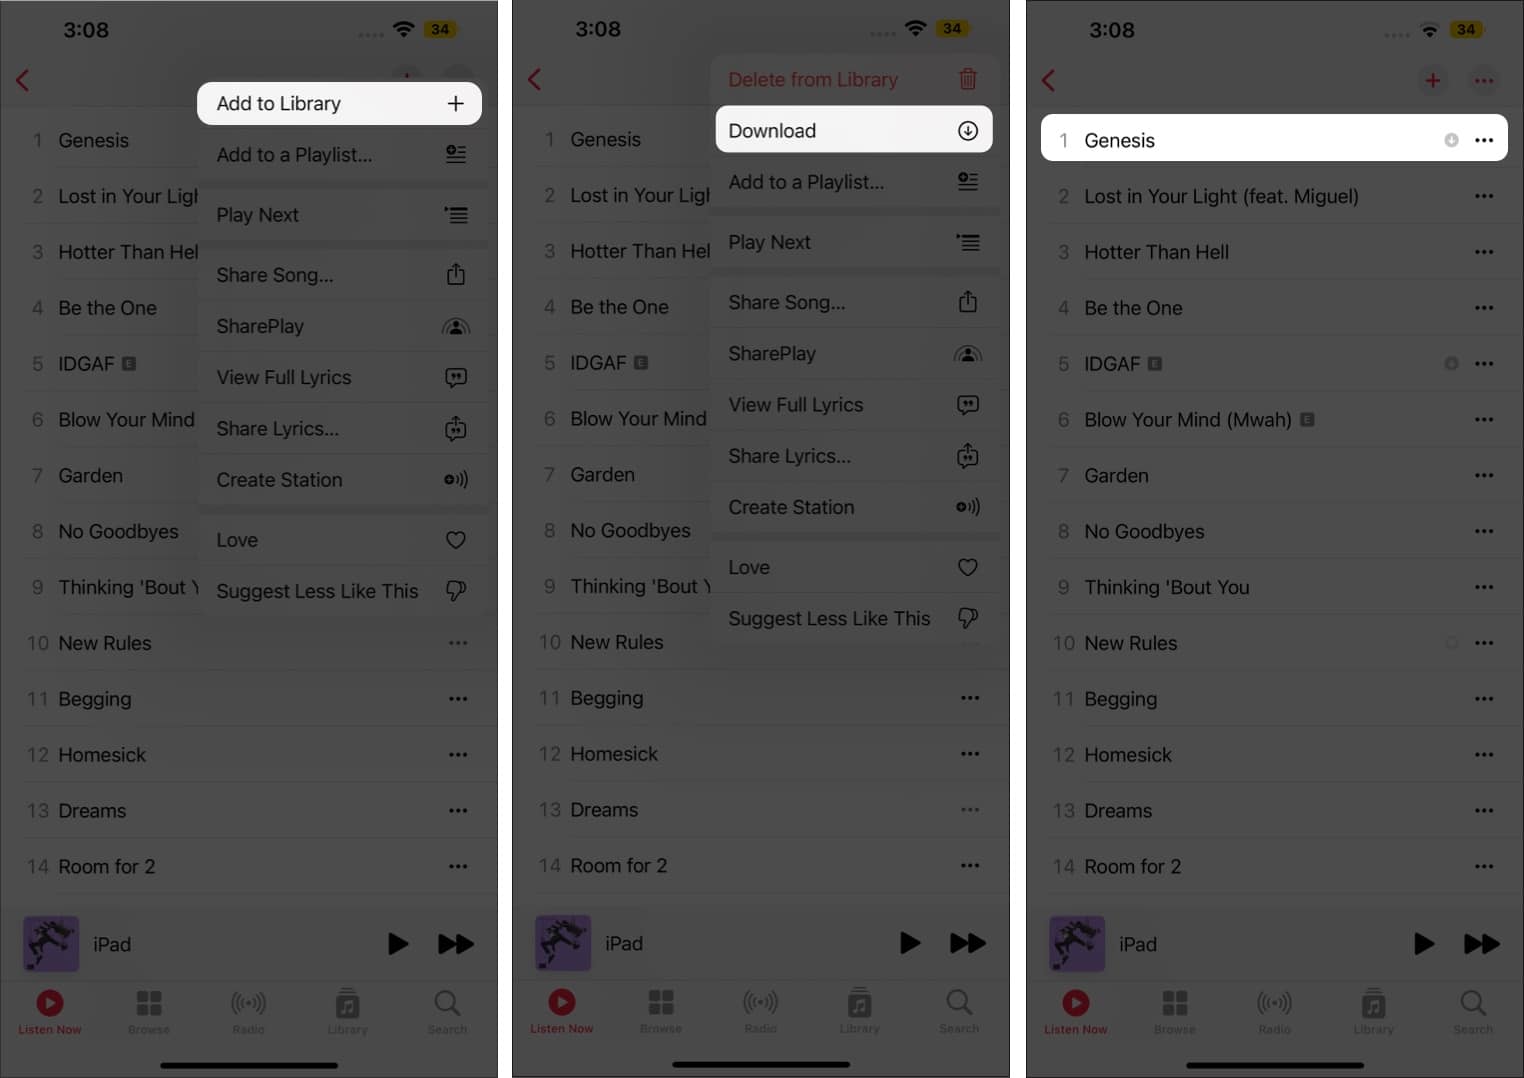 Download offline music in Apple Music on iPhone and iPad